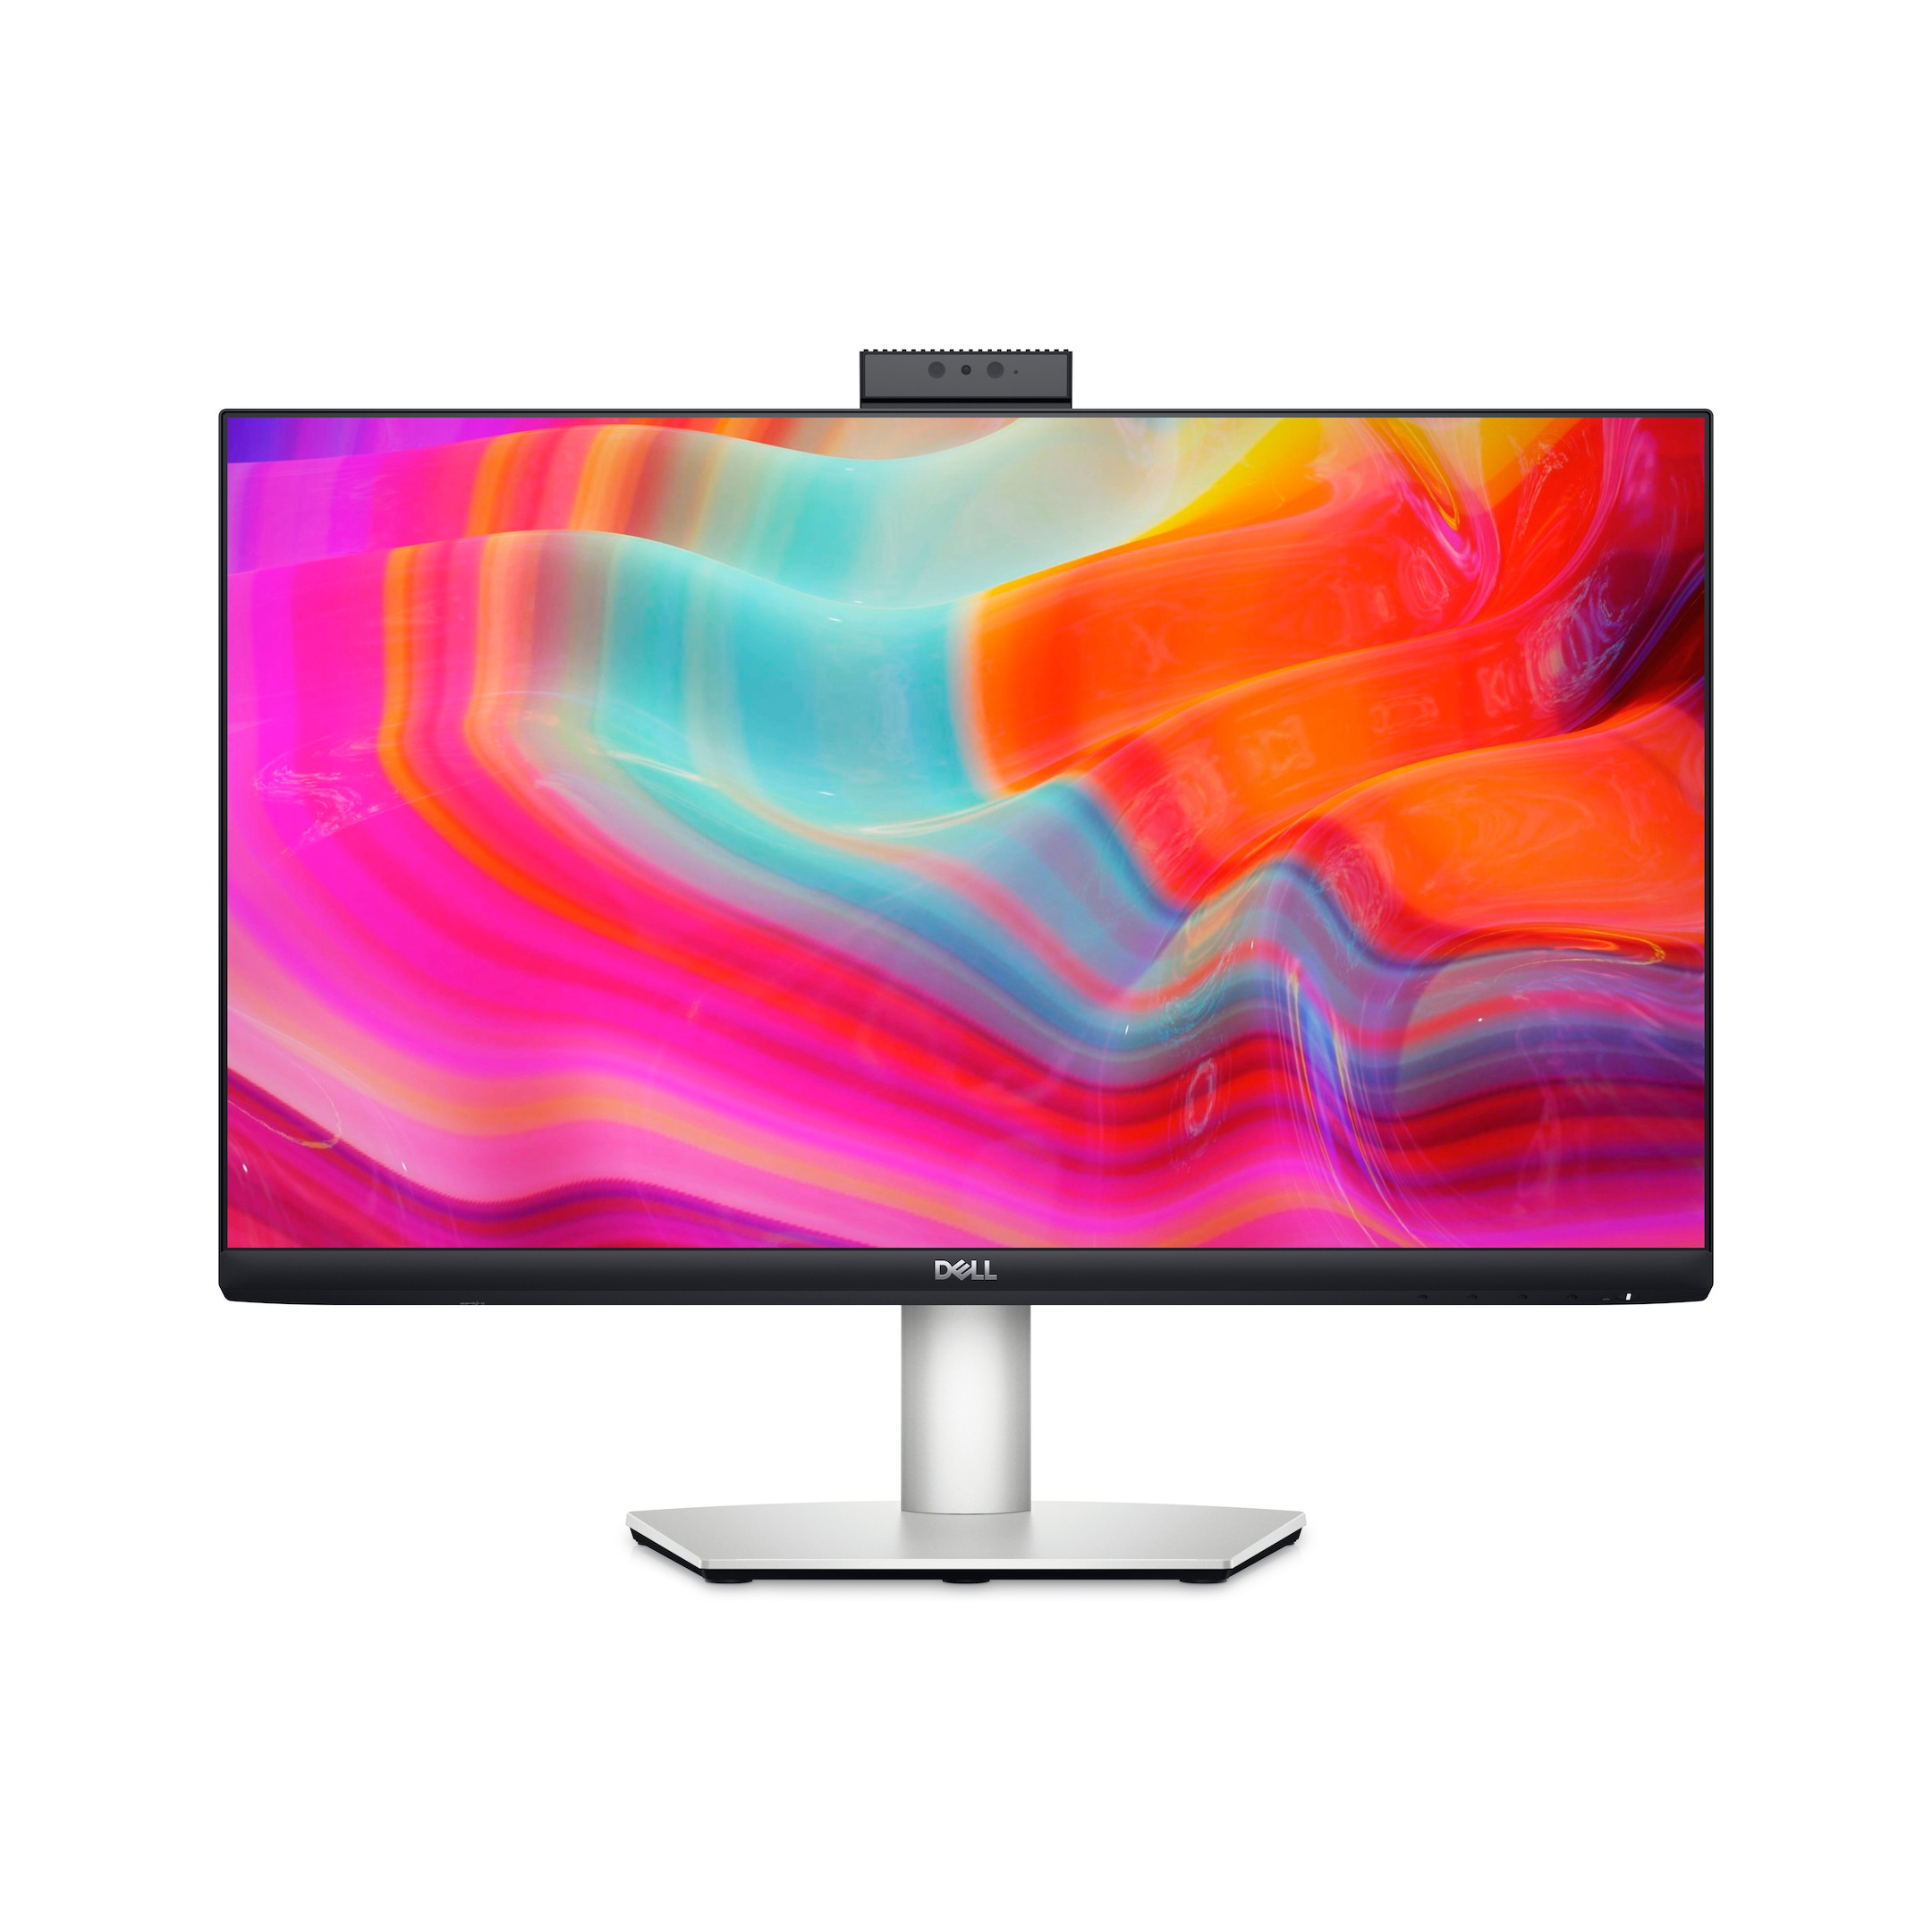 24 - Monitors discover to 27 (60 68.5 inches here cm) «